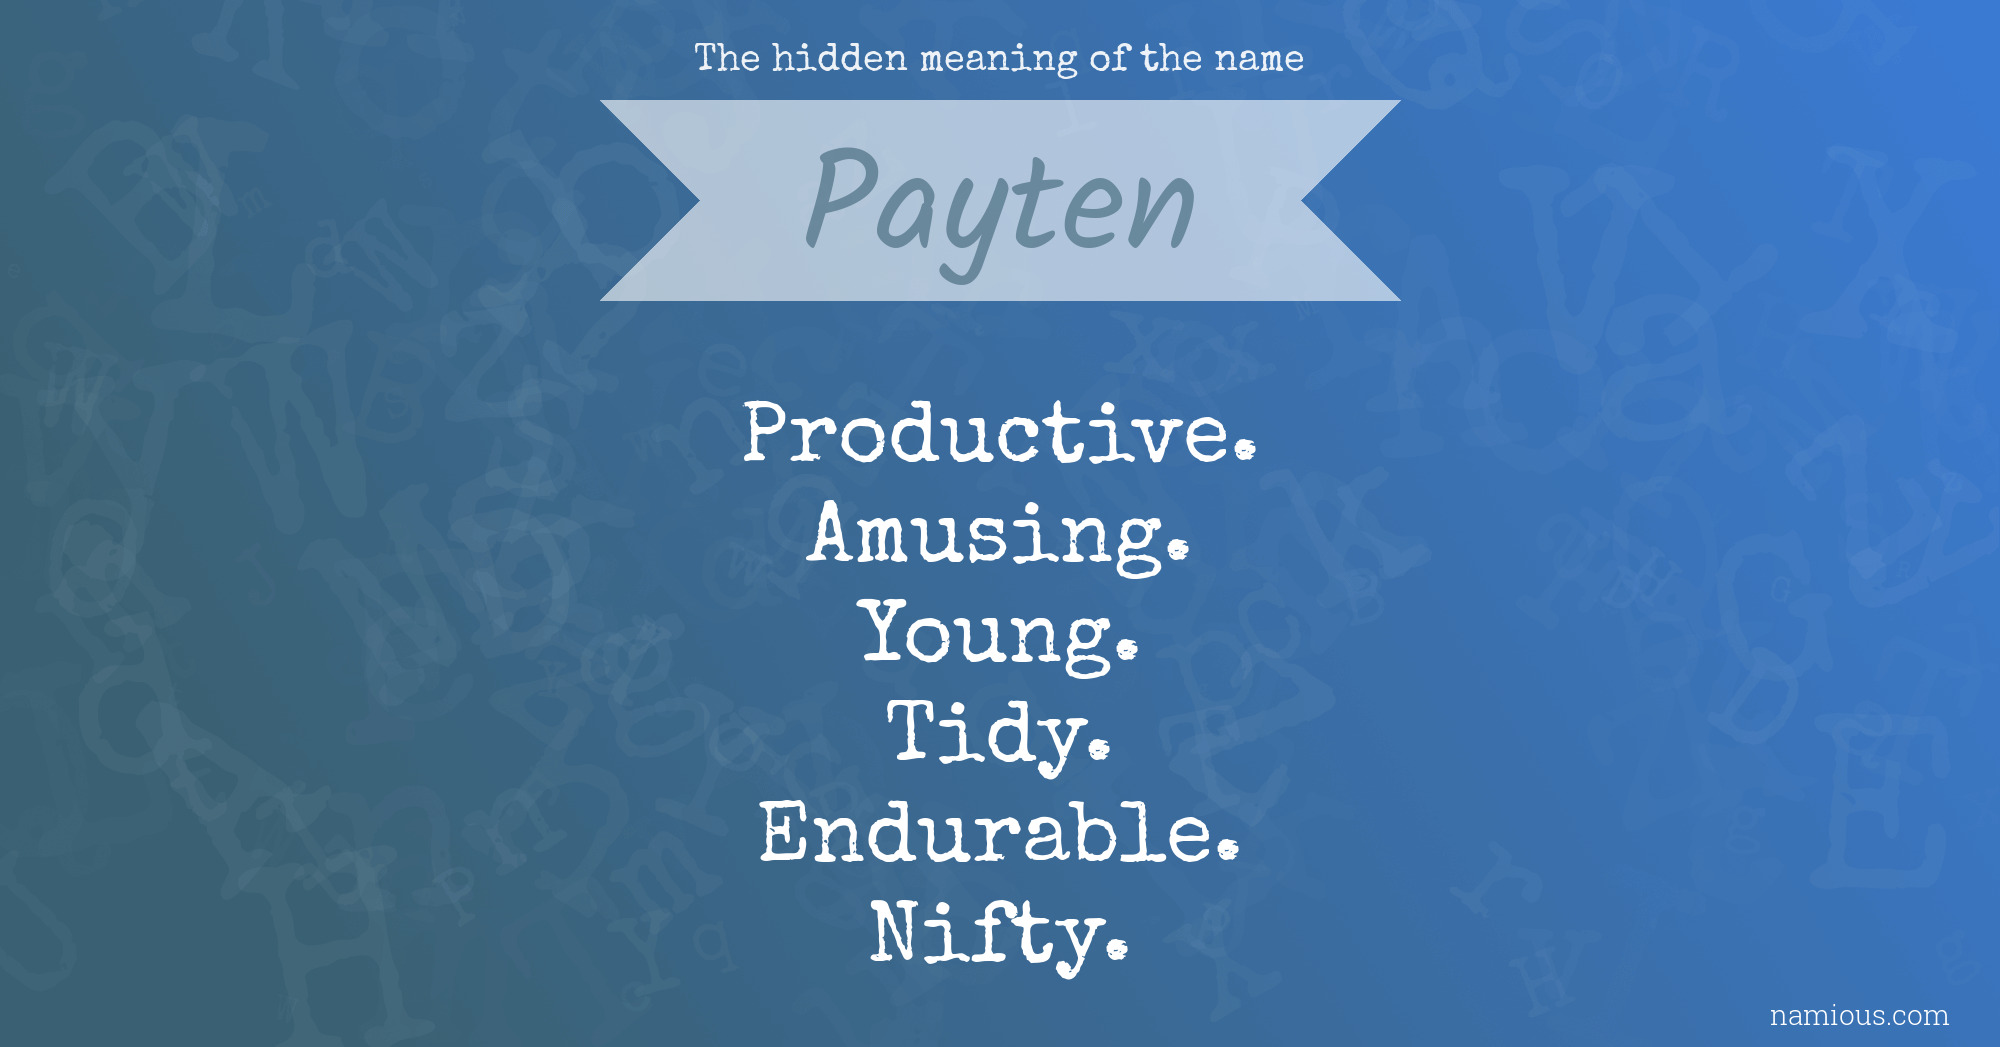 The hidden meaning of the name Payten